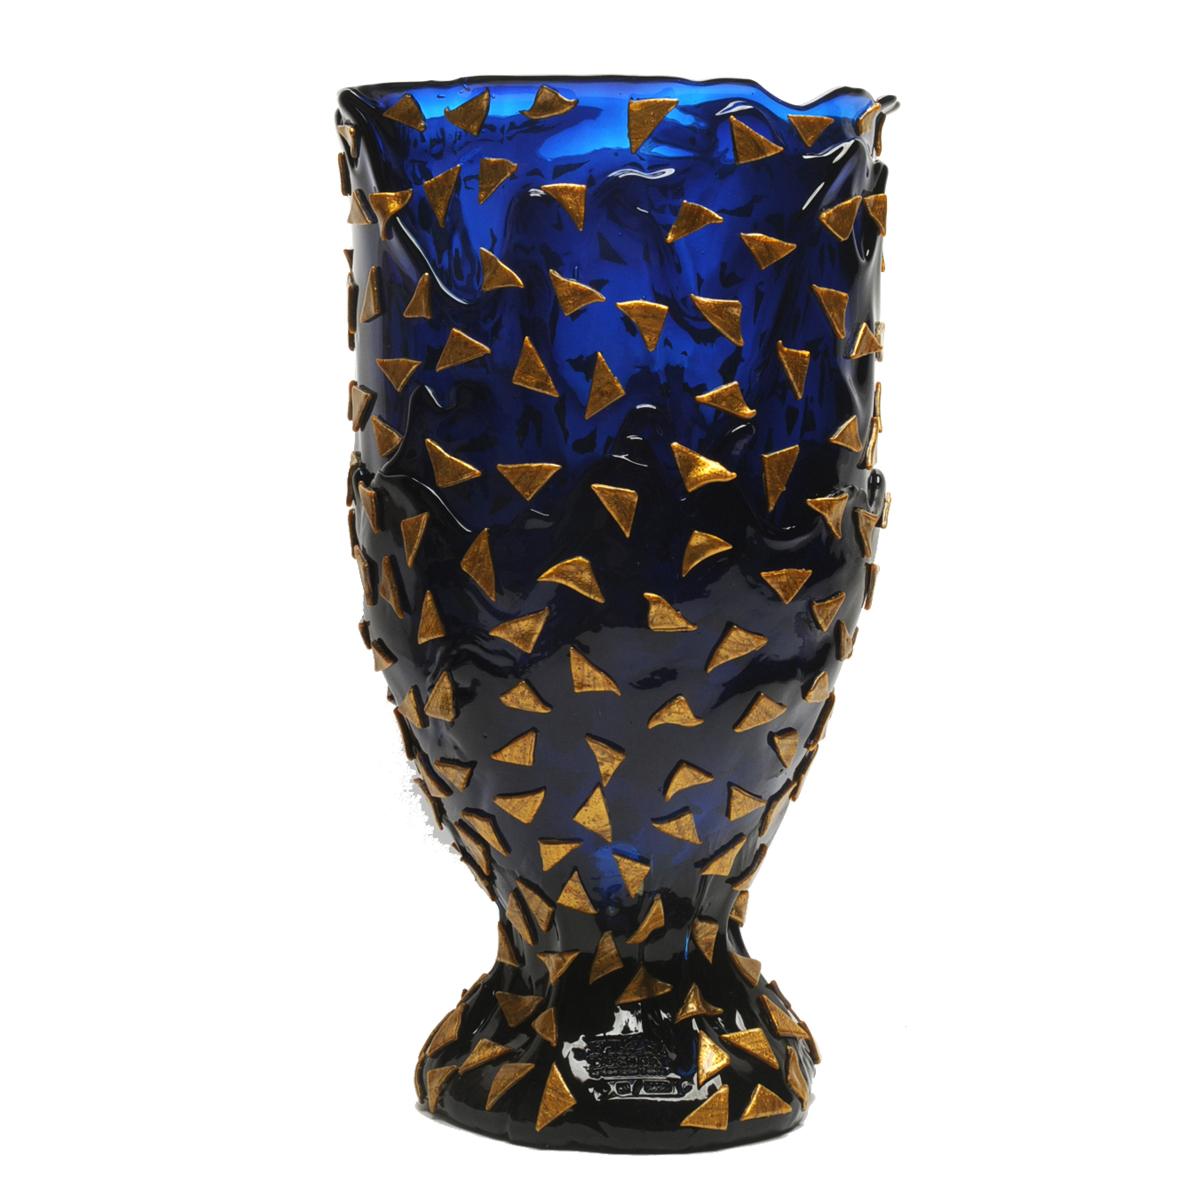 Starry night vase - blue and gold.

Vase in soft resin designed by Gaetano Pesce in 1995 for Fish Design collection.

Measures: XL - ø 30cm x H 56cm

Dimensions Available:
S - ø 10.5cm x H 19cm
M - ø 16cm x H 26cm
L - ø 22cm x H 36cm
XL -